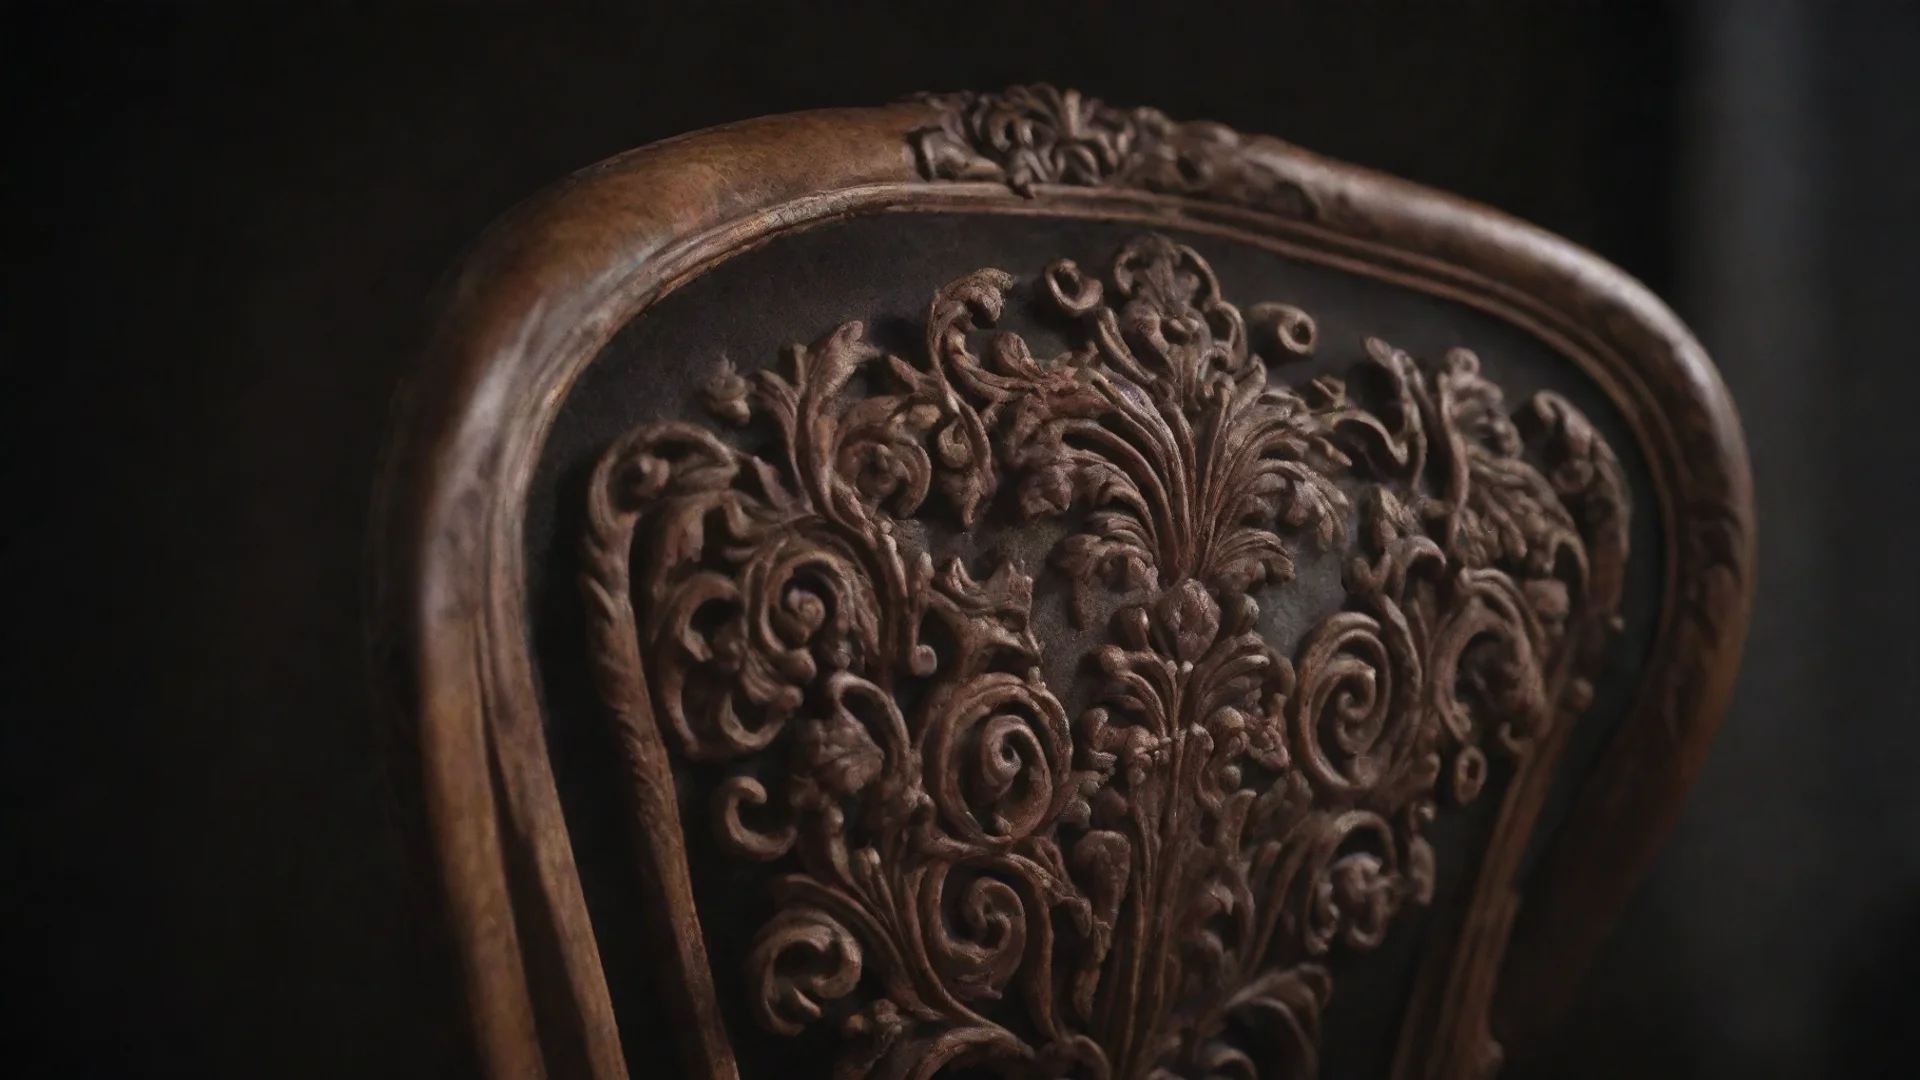 aiamazing detail view of an ornate chair back dark brown at the edge blurred with high craftsmanship and dark background awesome portrait 2 hdwidescreen